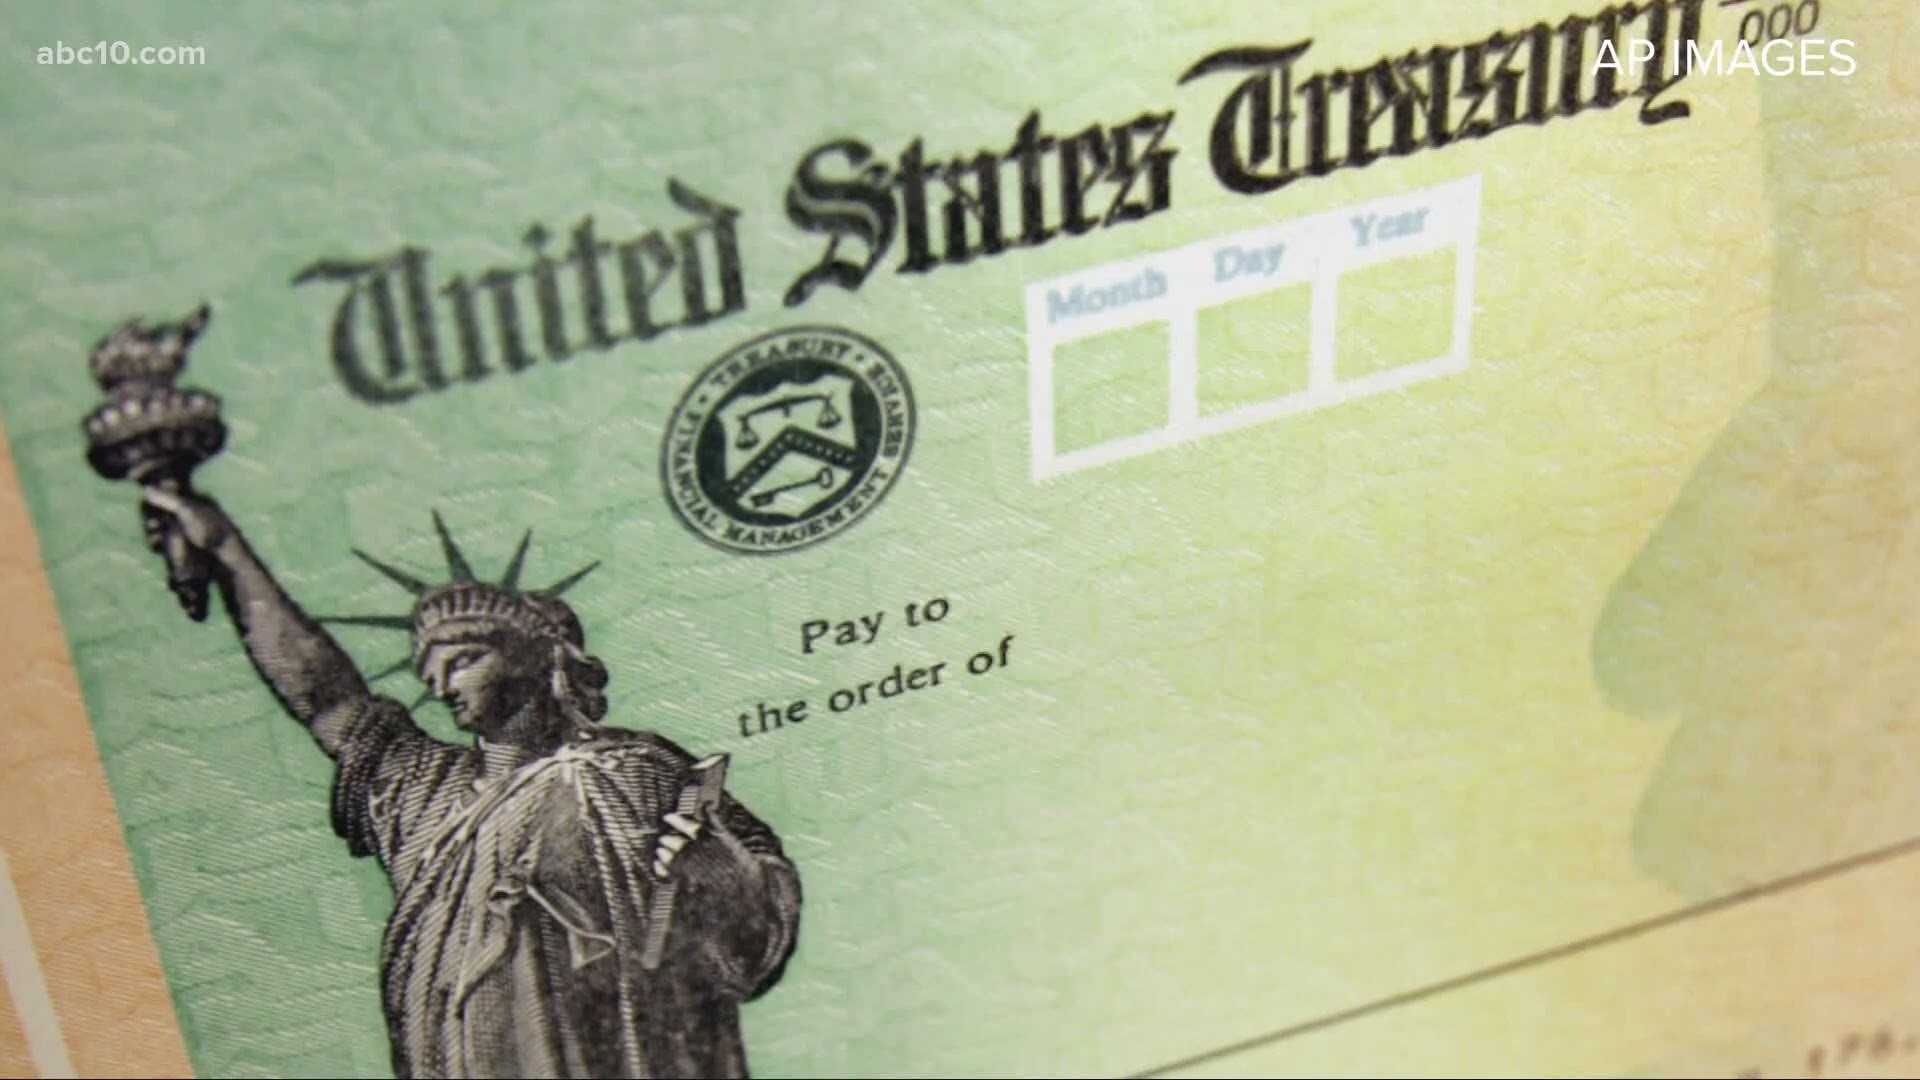 The first wave of federal stimulus checks have been sent out. If you have direct deposit, you can expect you money any day now. Here's how to track your check.